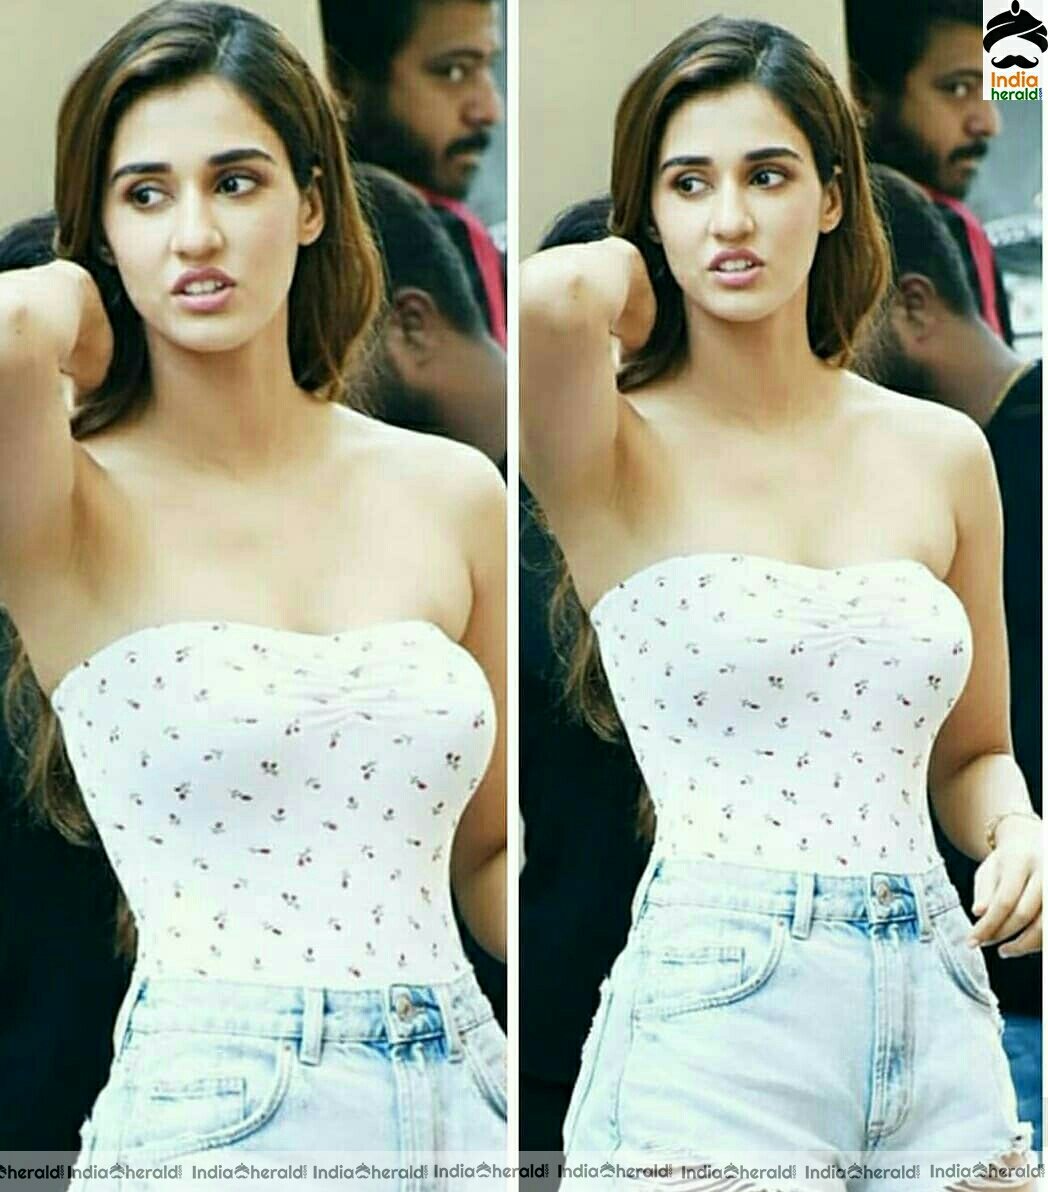 Disha Patani Shows Her Sexy Cleavage In White Sleeveless Top